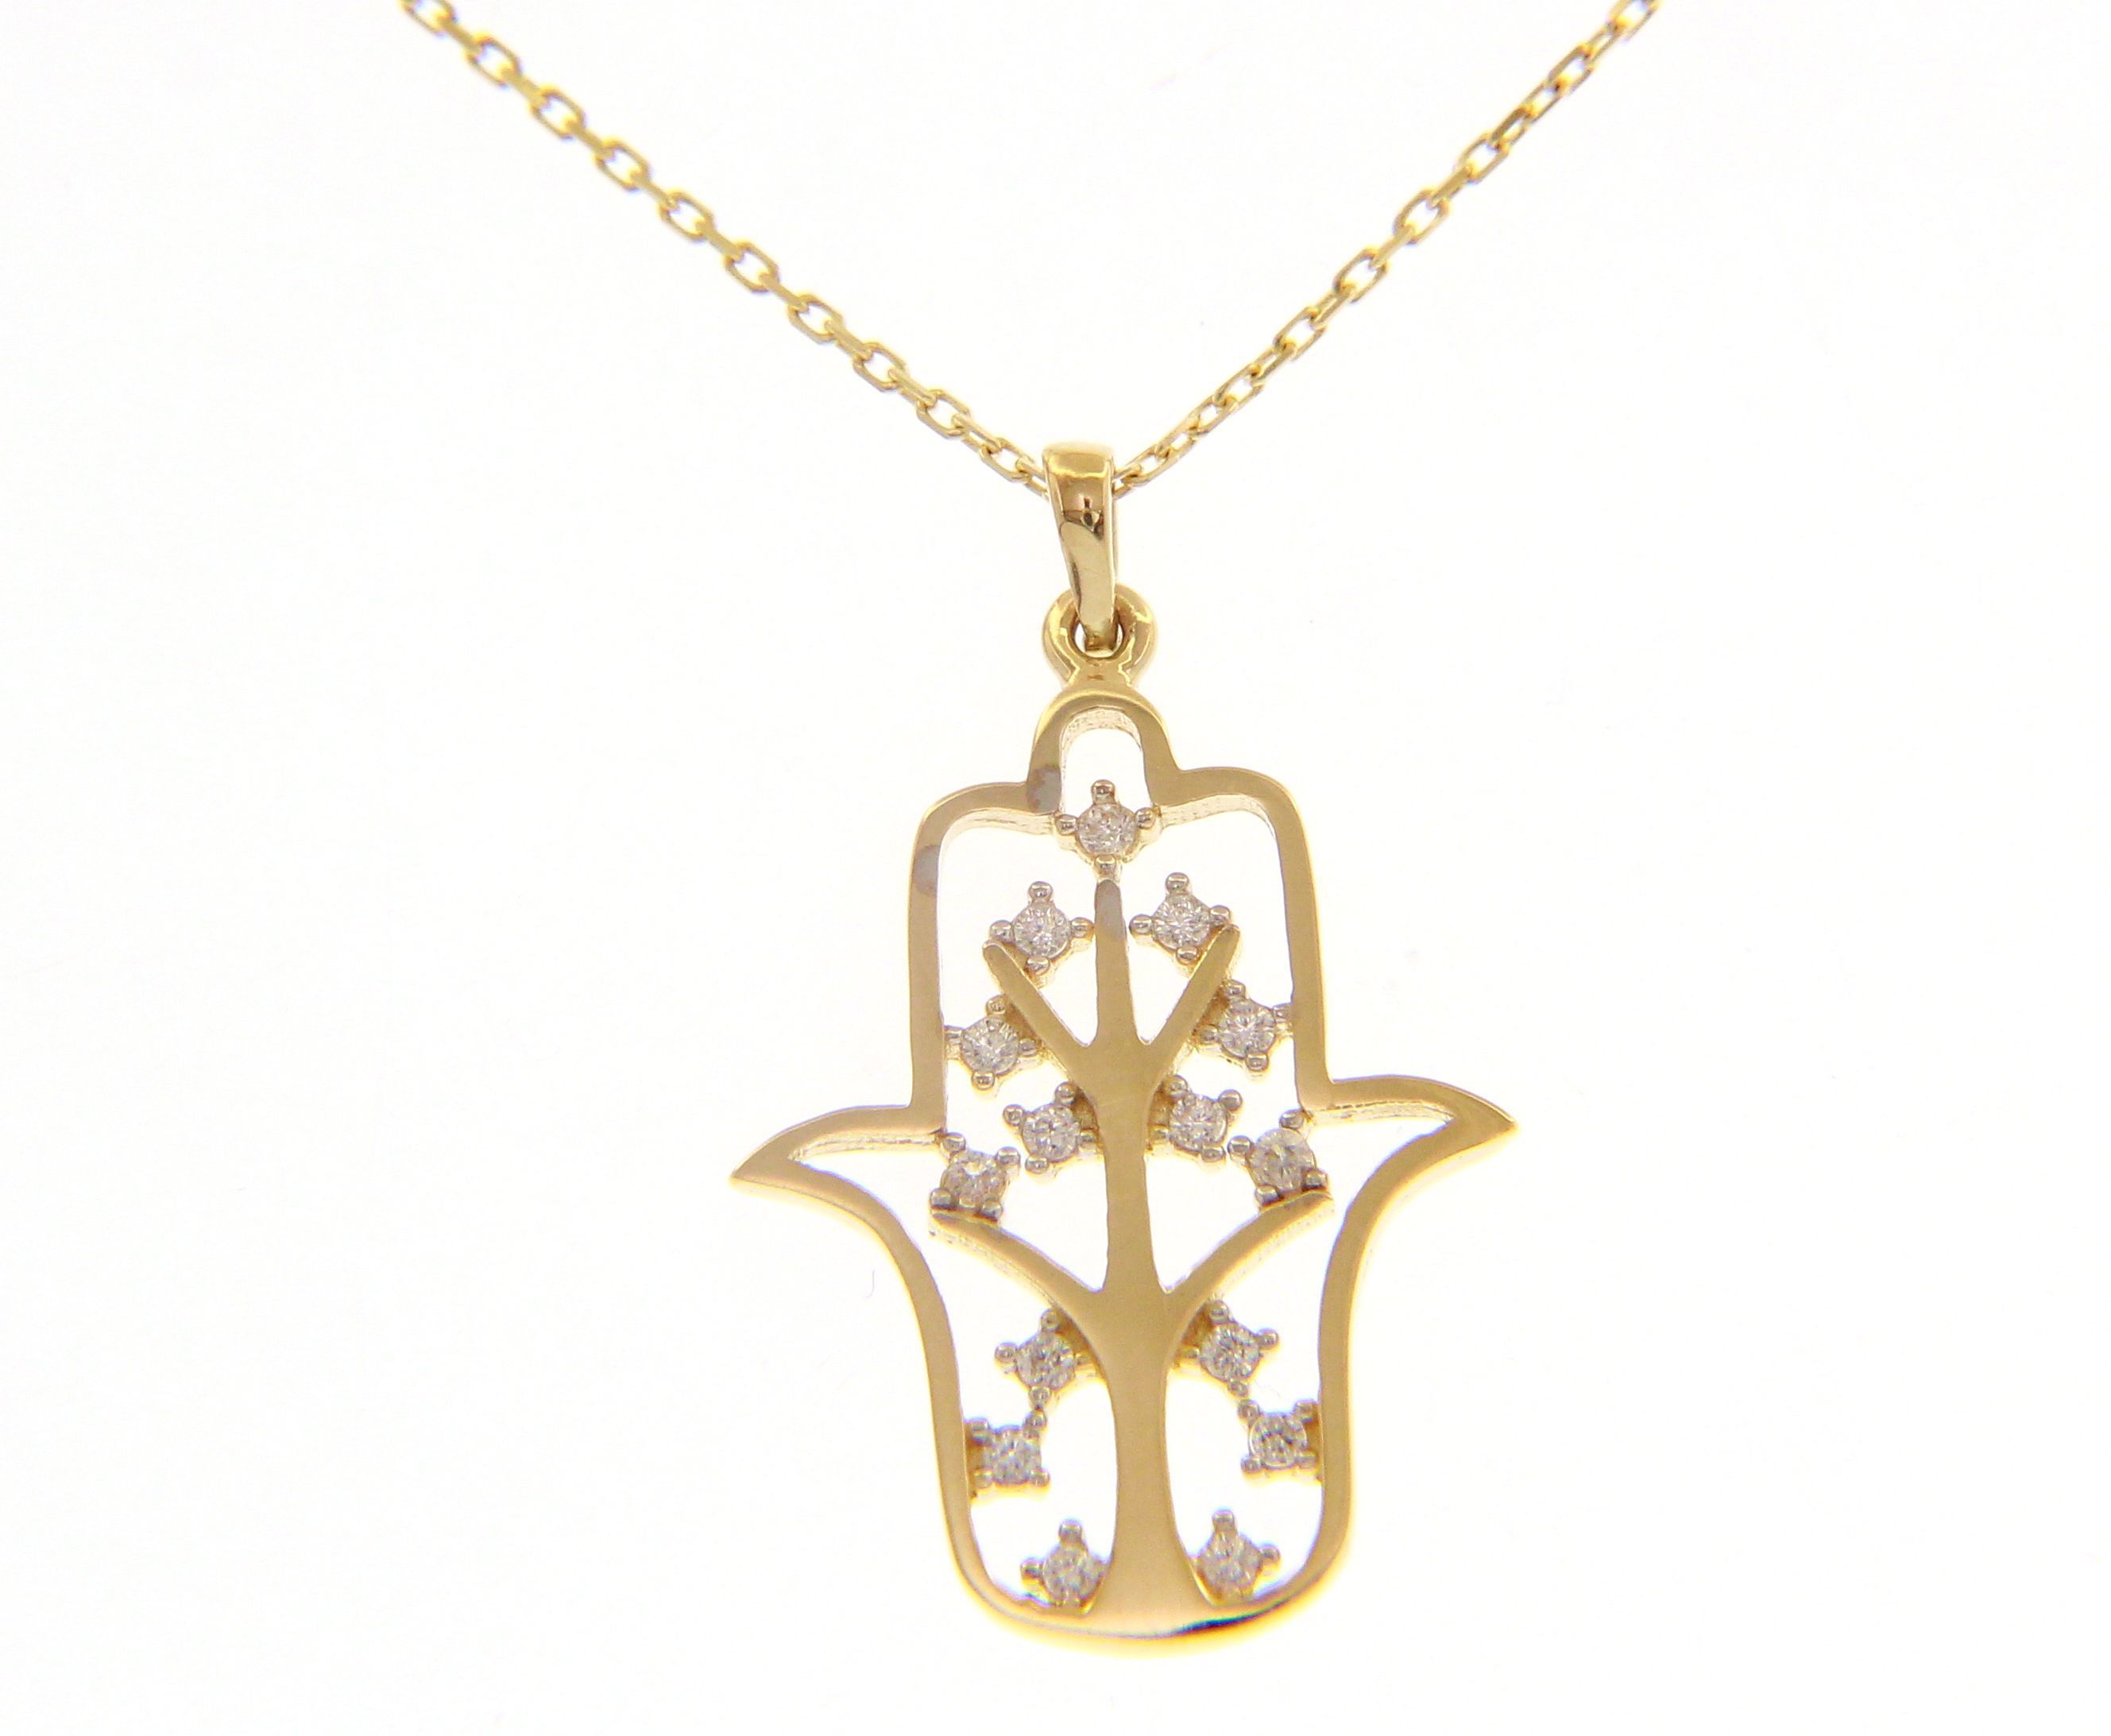 Golden necklace with the tree of life k14  (code S224101)